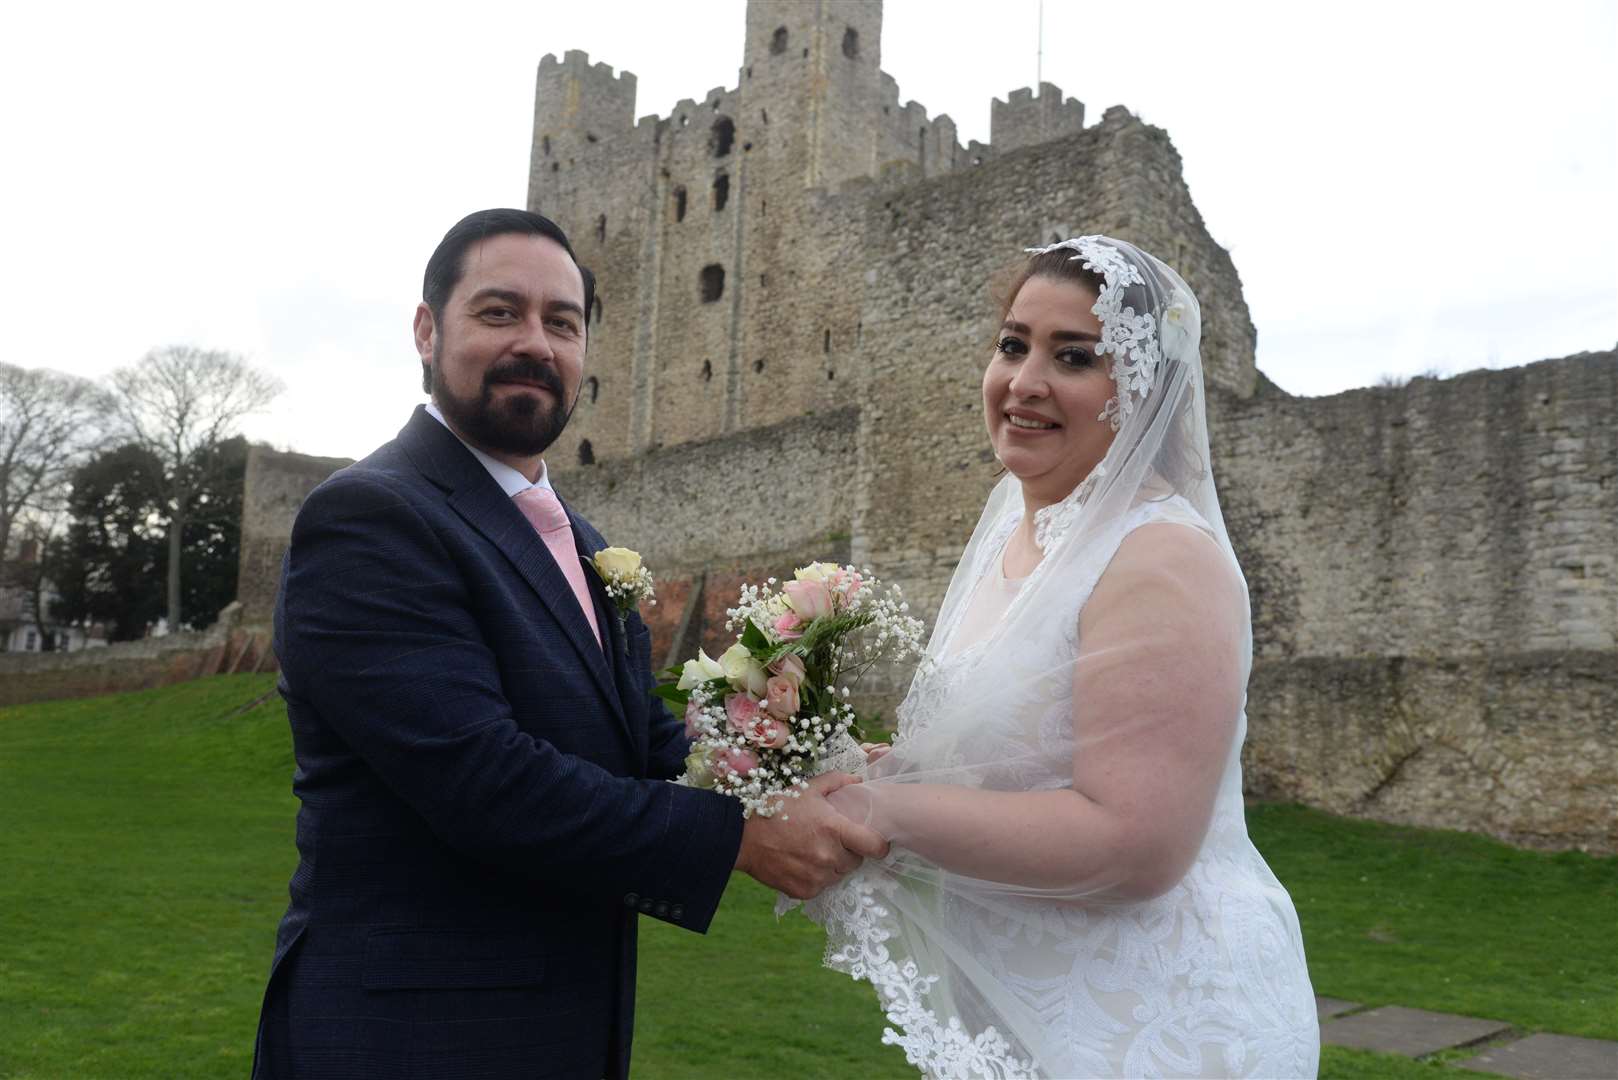 Emma was told she's the first Turkmenistan woman to get married in Kent